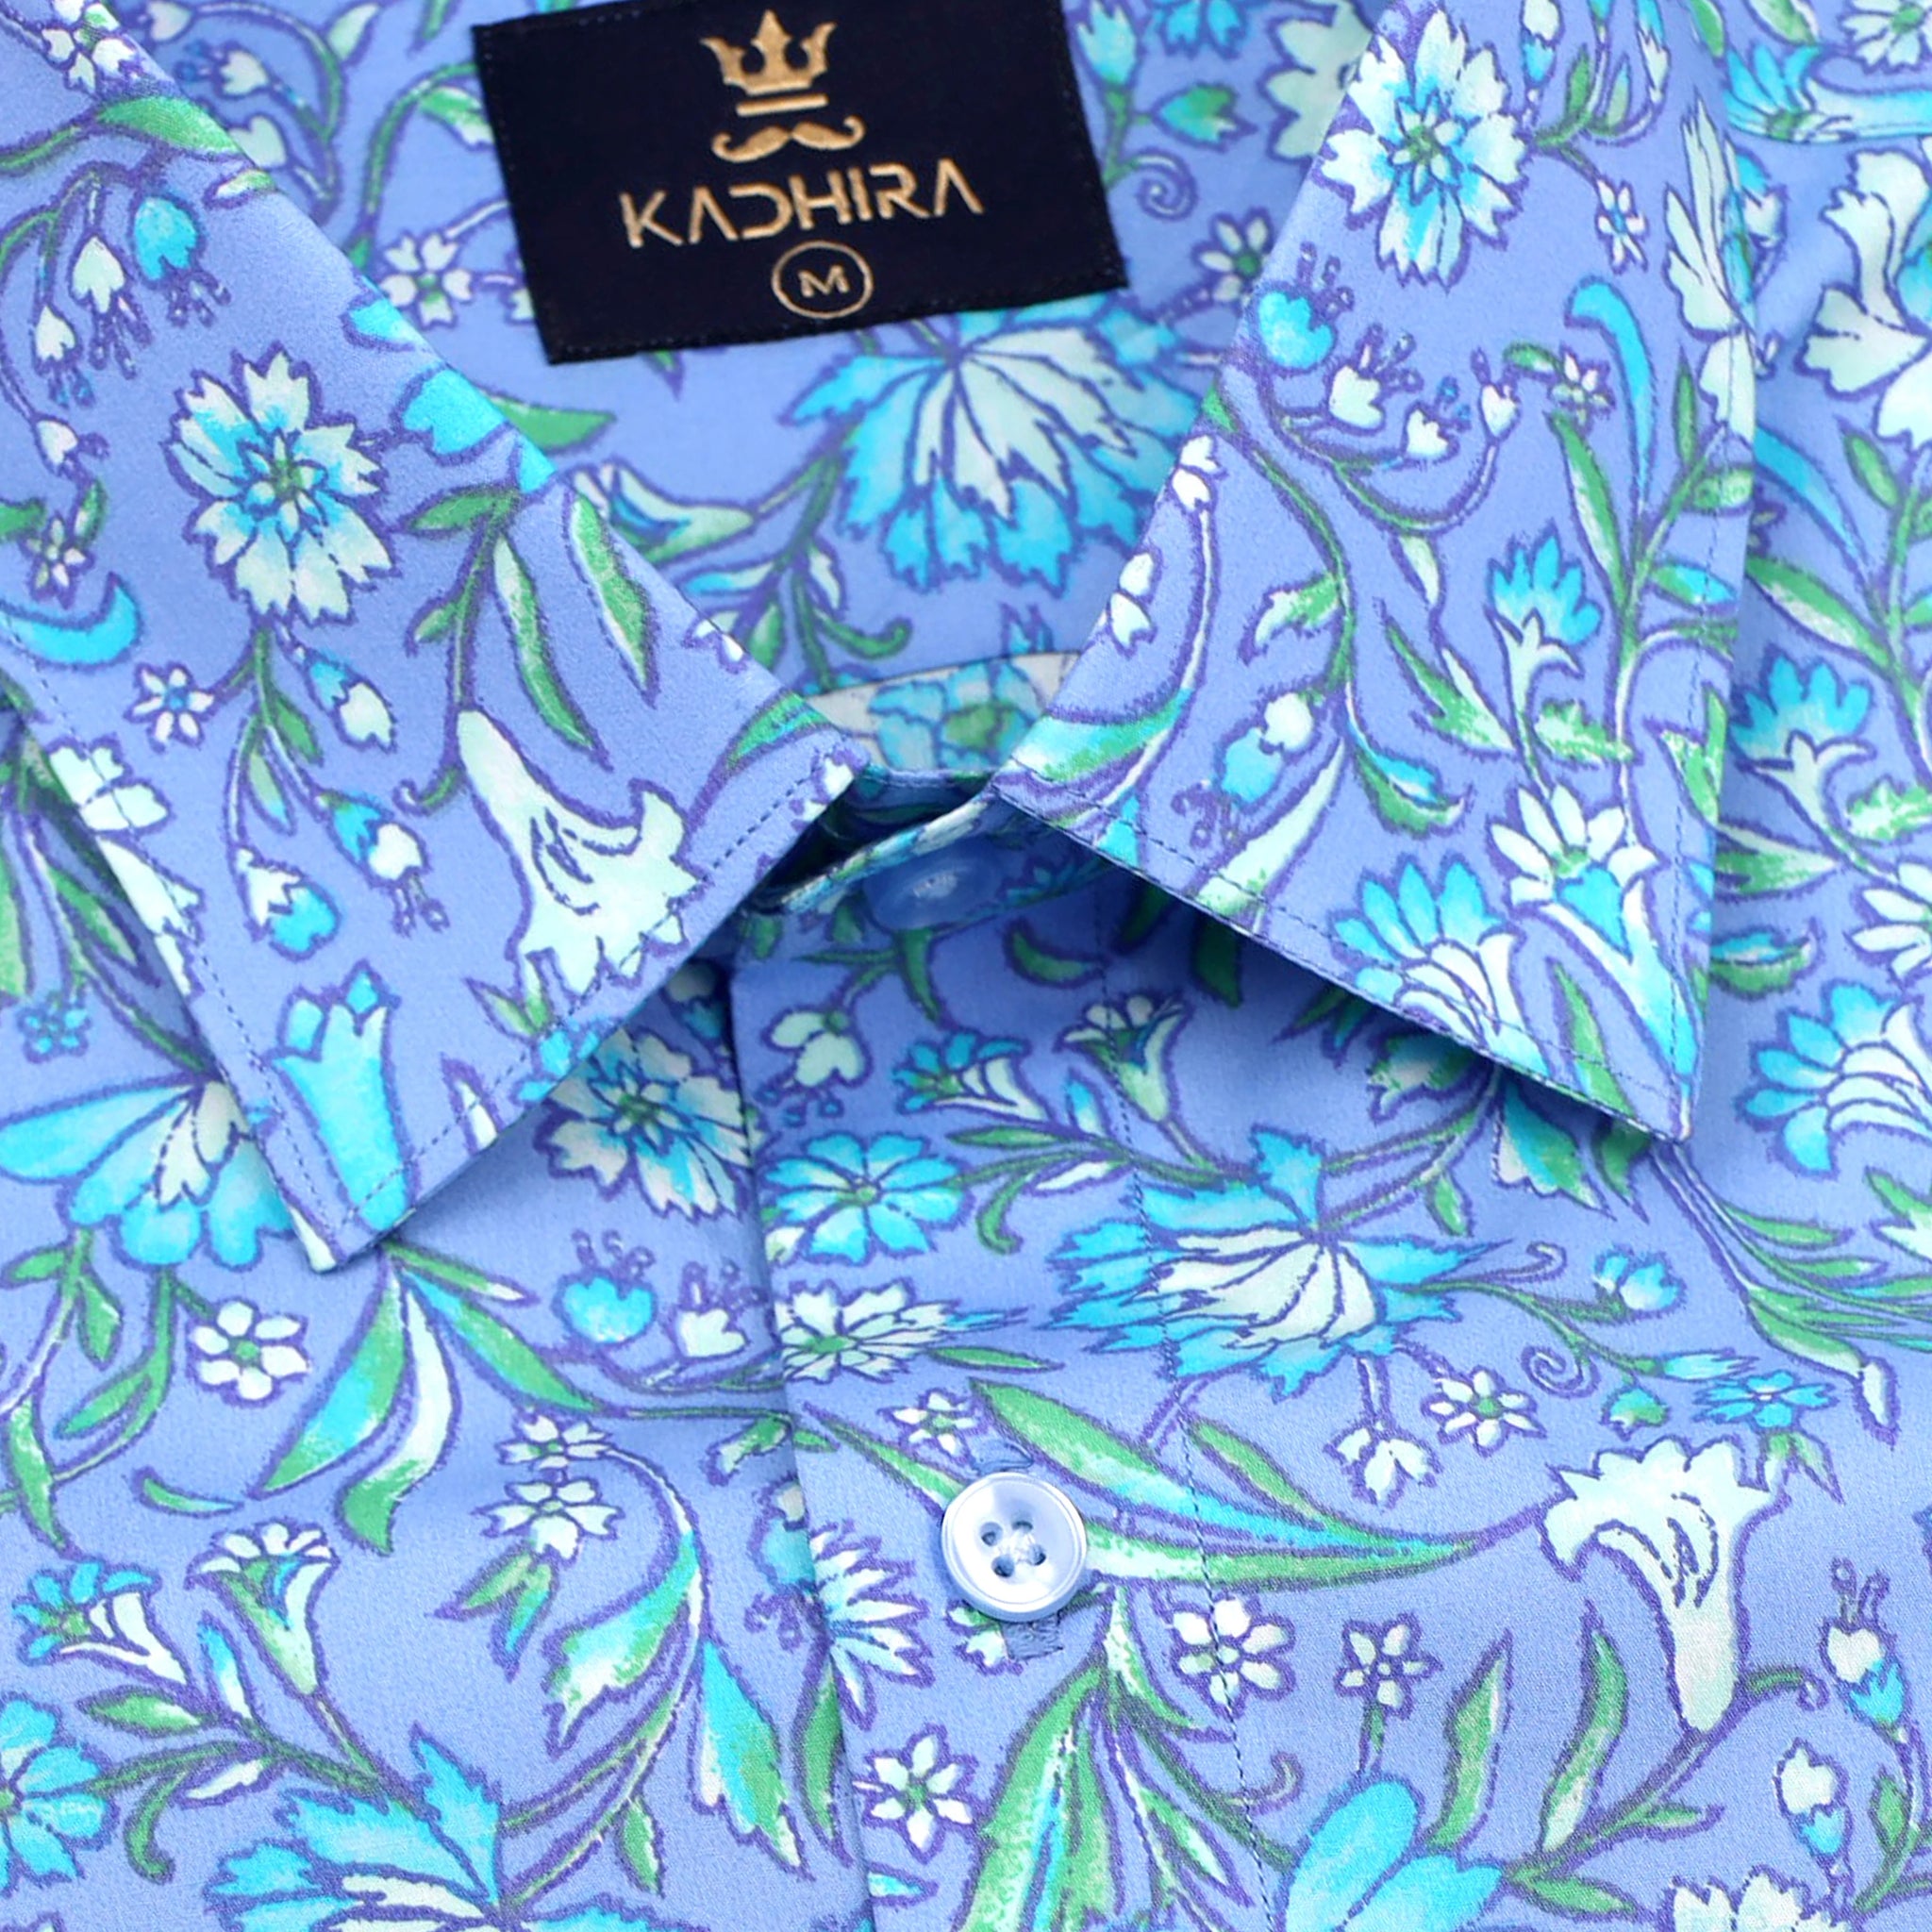 Periwinkle With Blue-White Flower Printed Premium Cotton Shirt